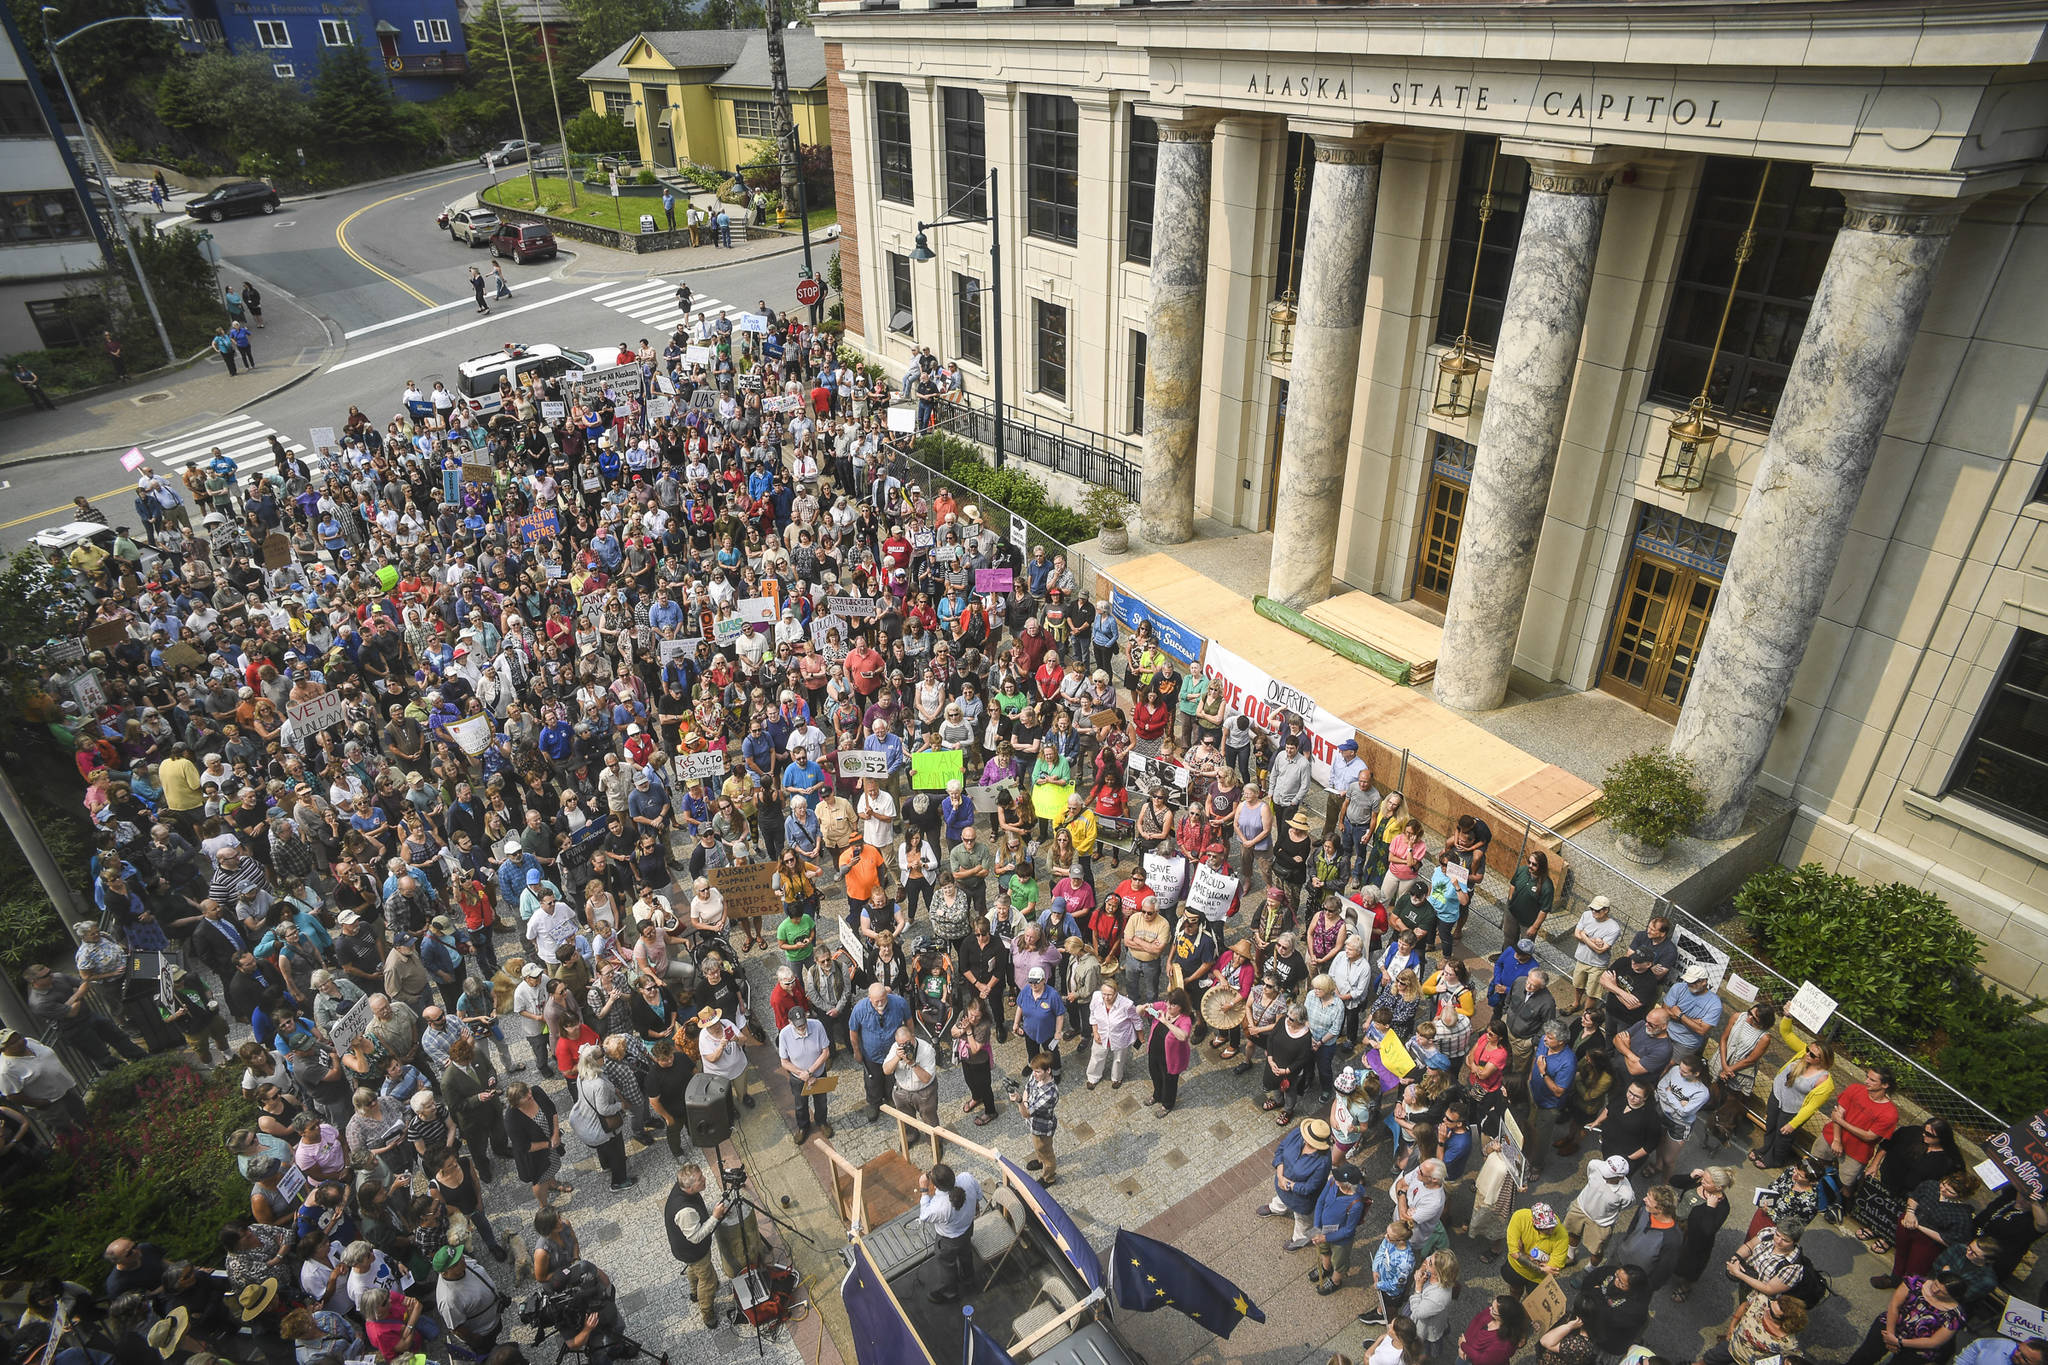 Hundreds attend a rally in front of the Capitol calling for an override of Gov. Mike Dunleavy’s budget vetoes on the first day of the Second Special Session of the Alaska Legislature in Juneau on Monday, July 8, 2019. (Michael Penn | Juneau Empire)